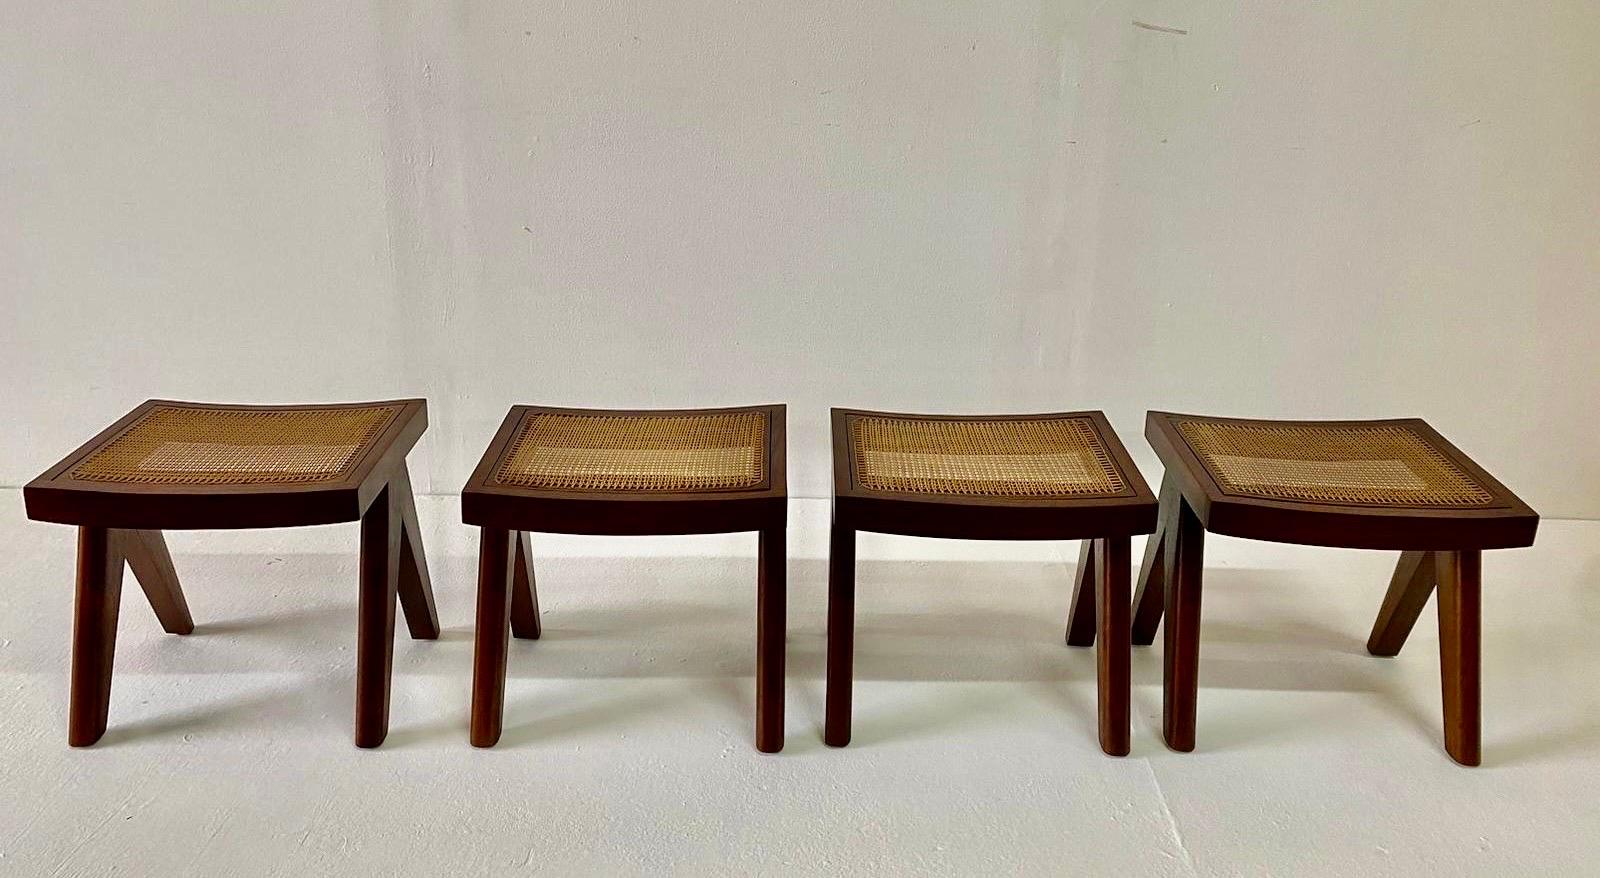 Studio Made Heavy Teak Stools - Manner of Jeanneret (2 Pairs Available) For Sale 6